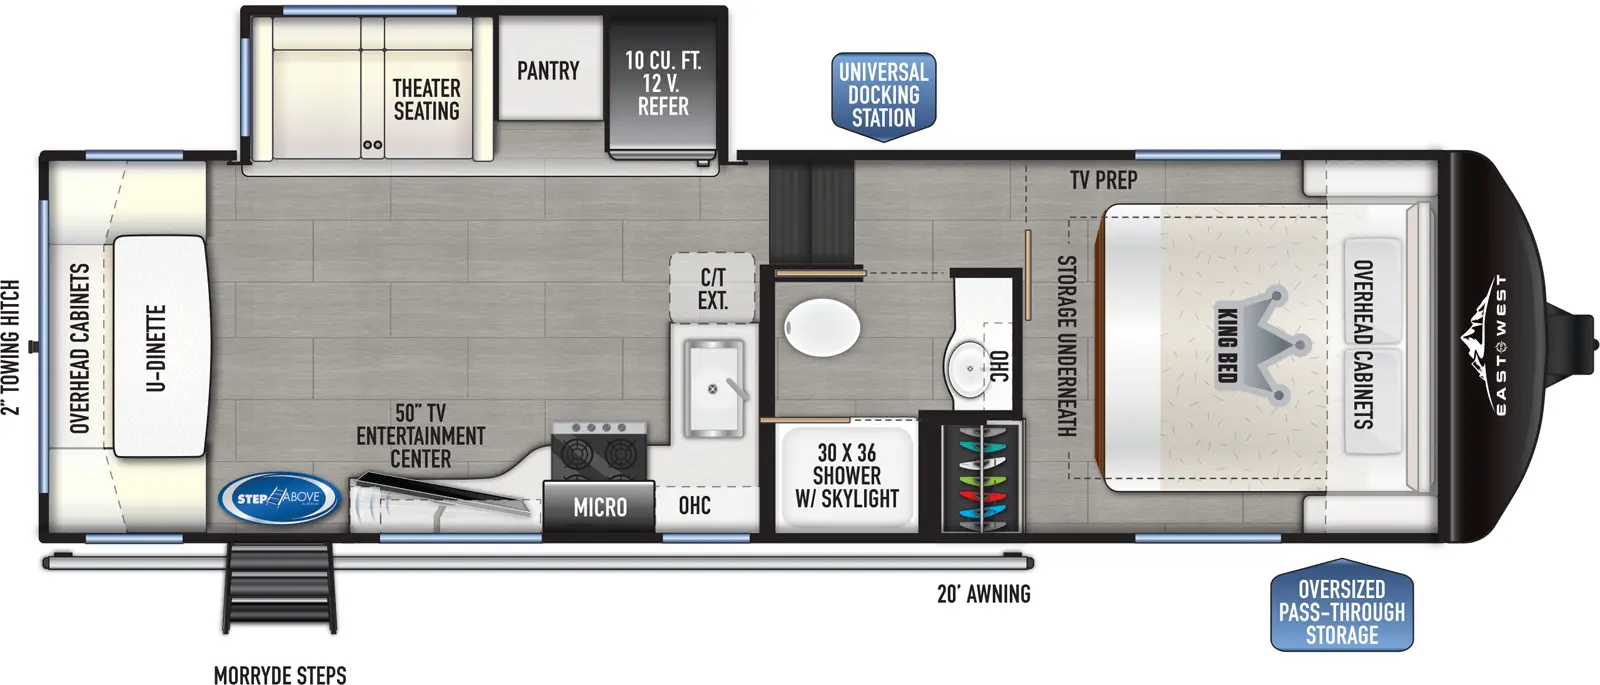 The 26RD has one slideout and one entry. Exterior features an oversized pass through storage, universal docking station, MORryde Steps, 20 foot awning, and 2 inch towing hitch. Interior layout front to back: foot-facing king bed with storage underneath, overhead cabinets, off-door side TV prep, and door side closet; door side full bathroom with overhead cabinet and shower with skylight; steps down to main living area; off-door side slideout with 12V refrigerator, pantry, and theater seating; kitchen counter with sink and extension wraps along inner wall to door side with cooktop, microwave, entertainment center with TV, and entry; rear u-dinette with overhead cabinets.